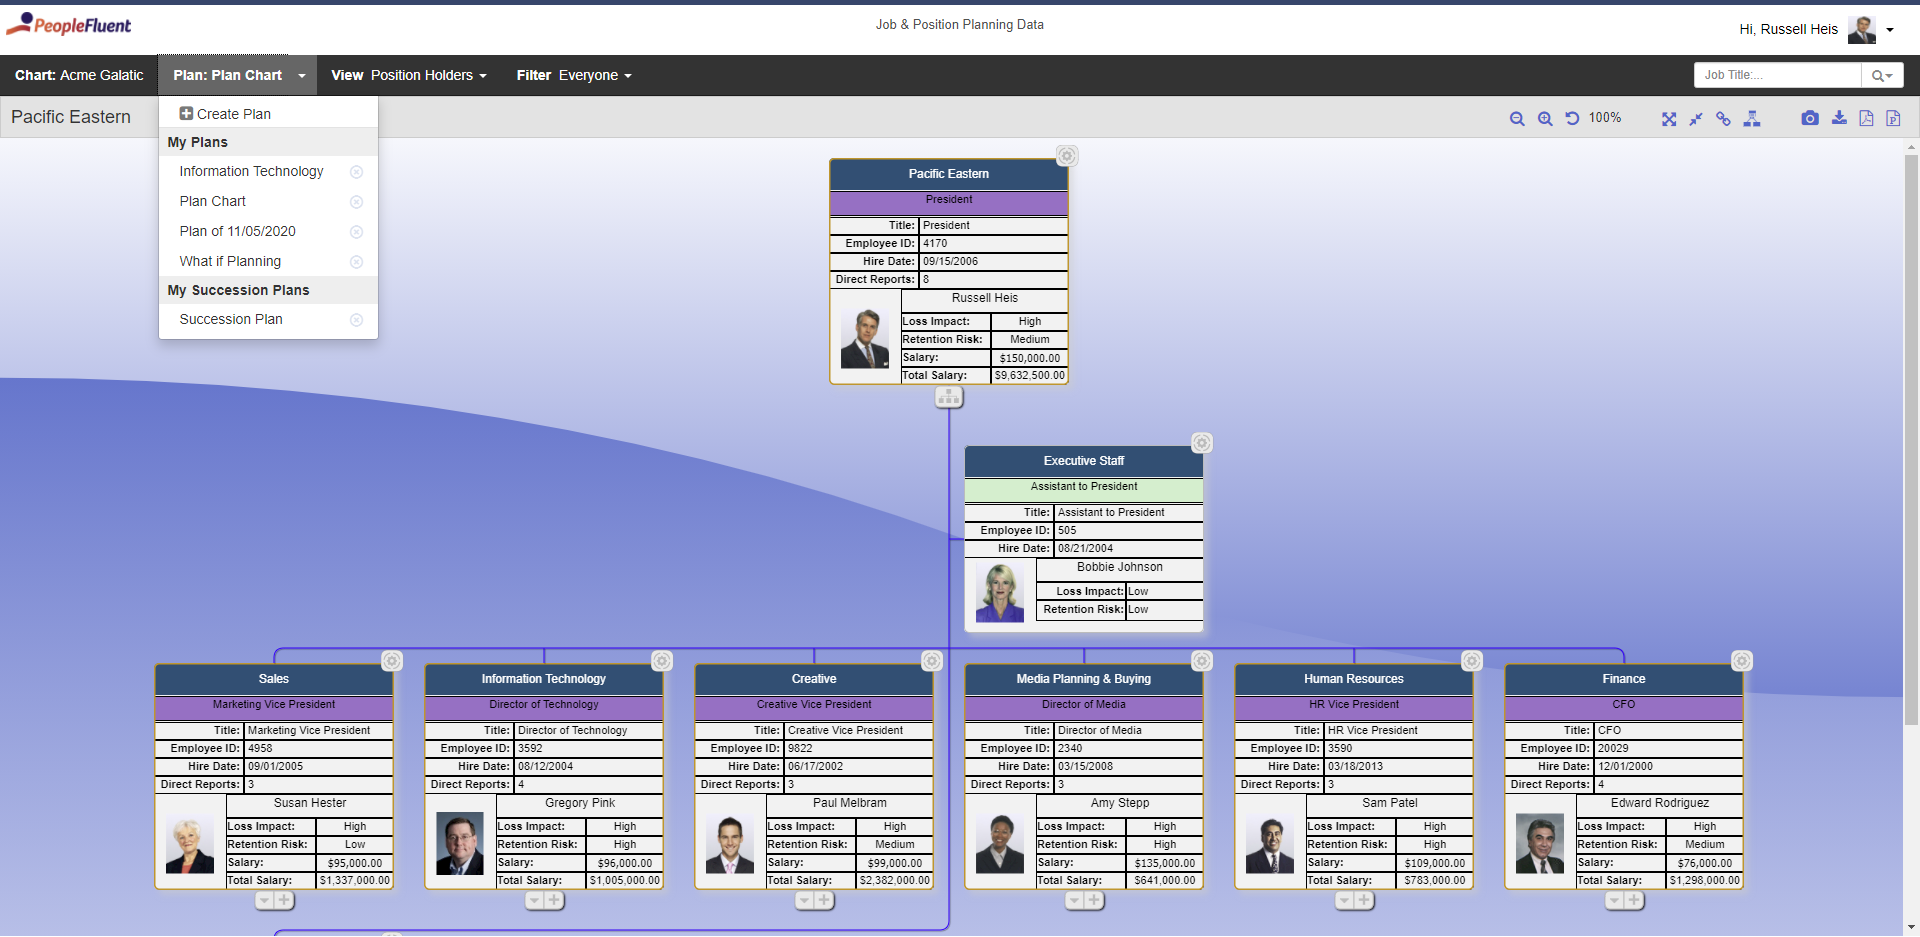 Organizational chart with three rows of employees, indicating the organization's hierarchy from the top-down.